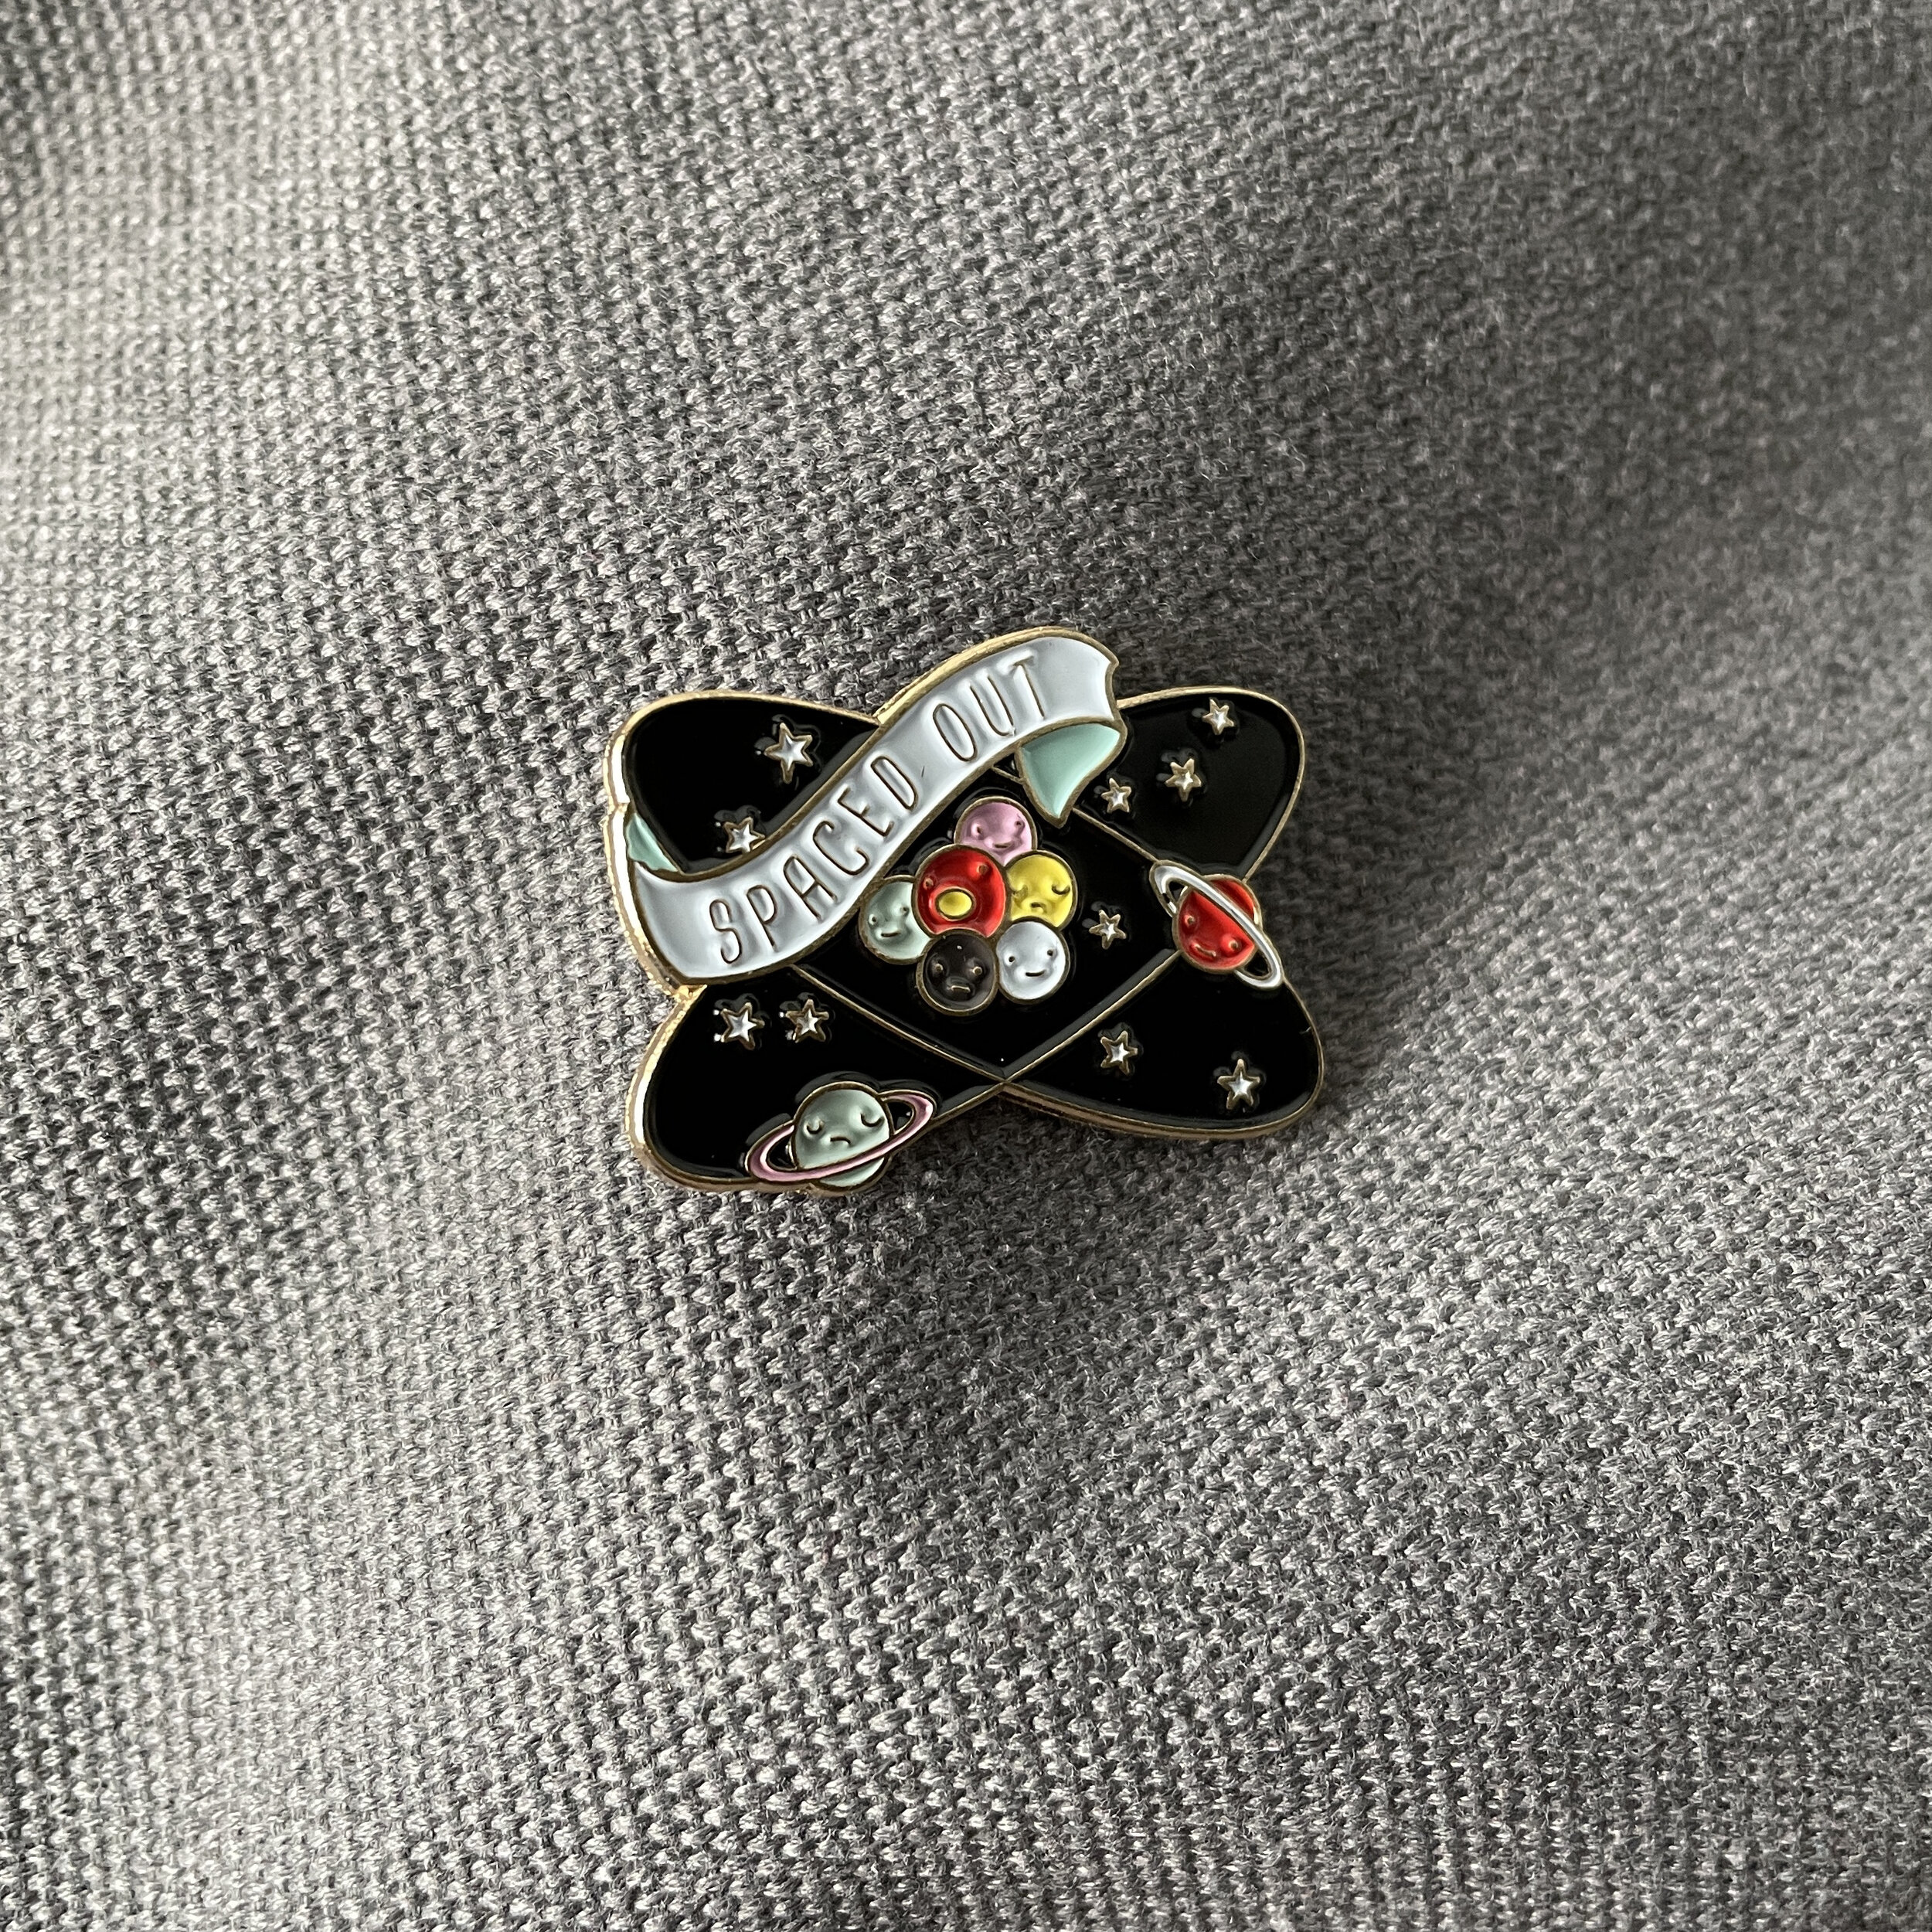 The Gentleman Stationer Spaced Out Planets and Atoms Lapel Pin